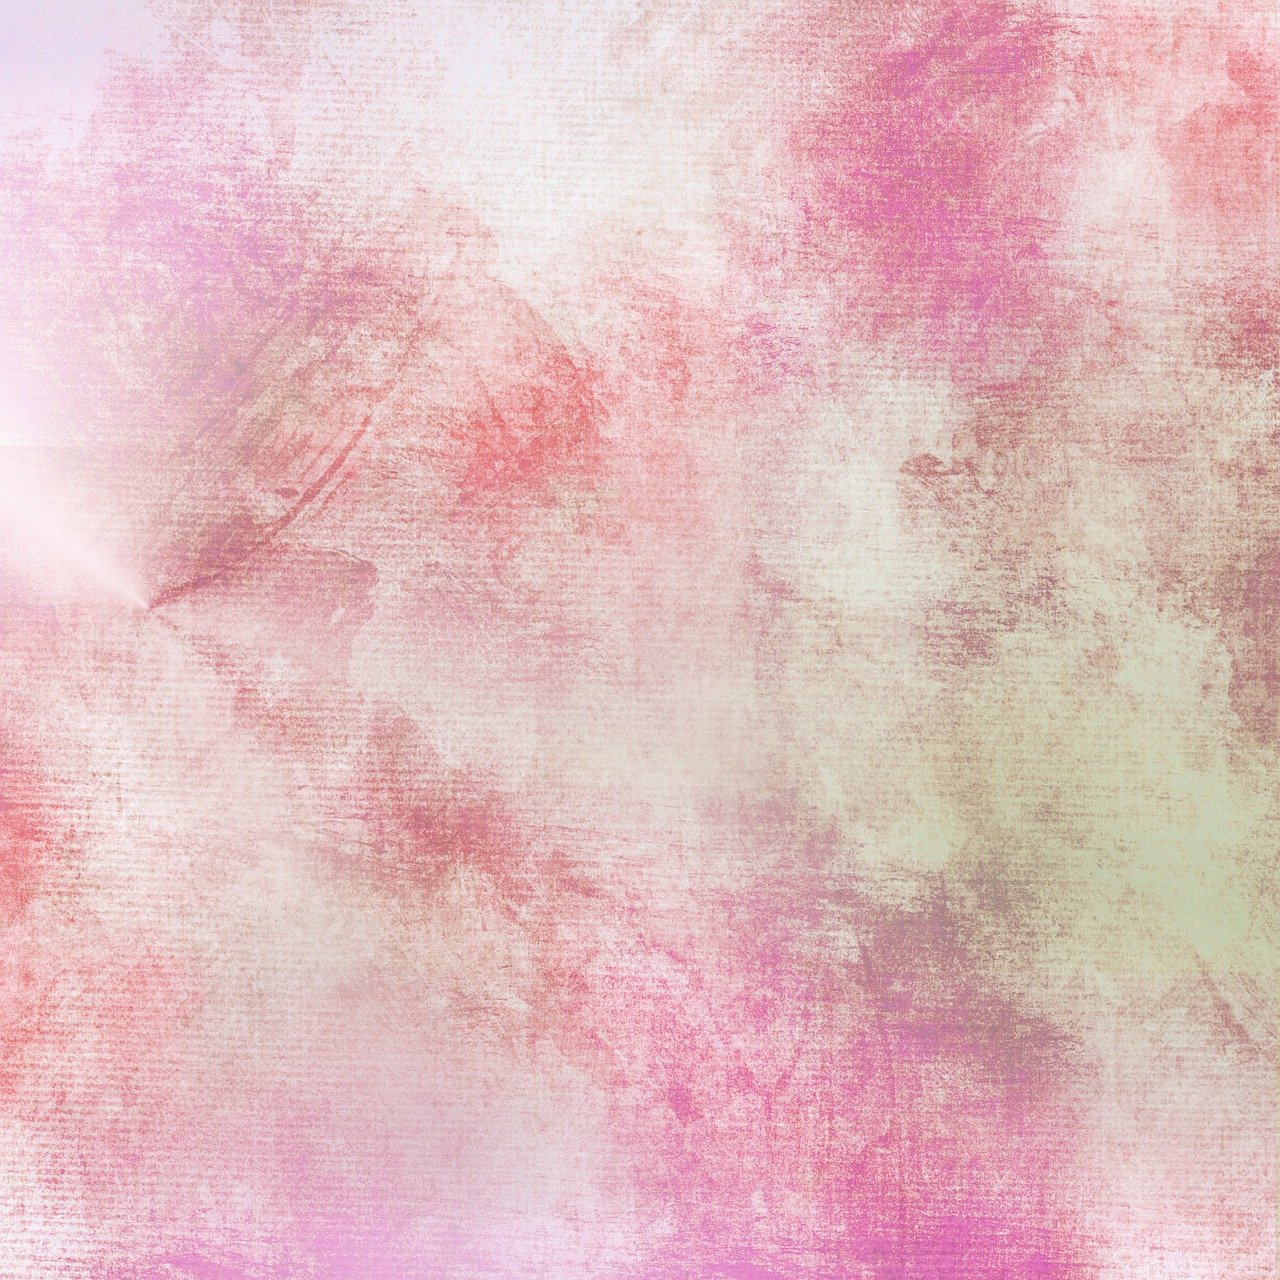 a close up of a pink and green background, a pastel, inspired by Anna Füssli, abstract art, textured photoshop brushes, fairy tale style background, red white background, faded parchment